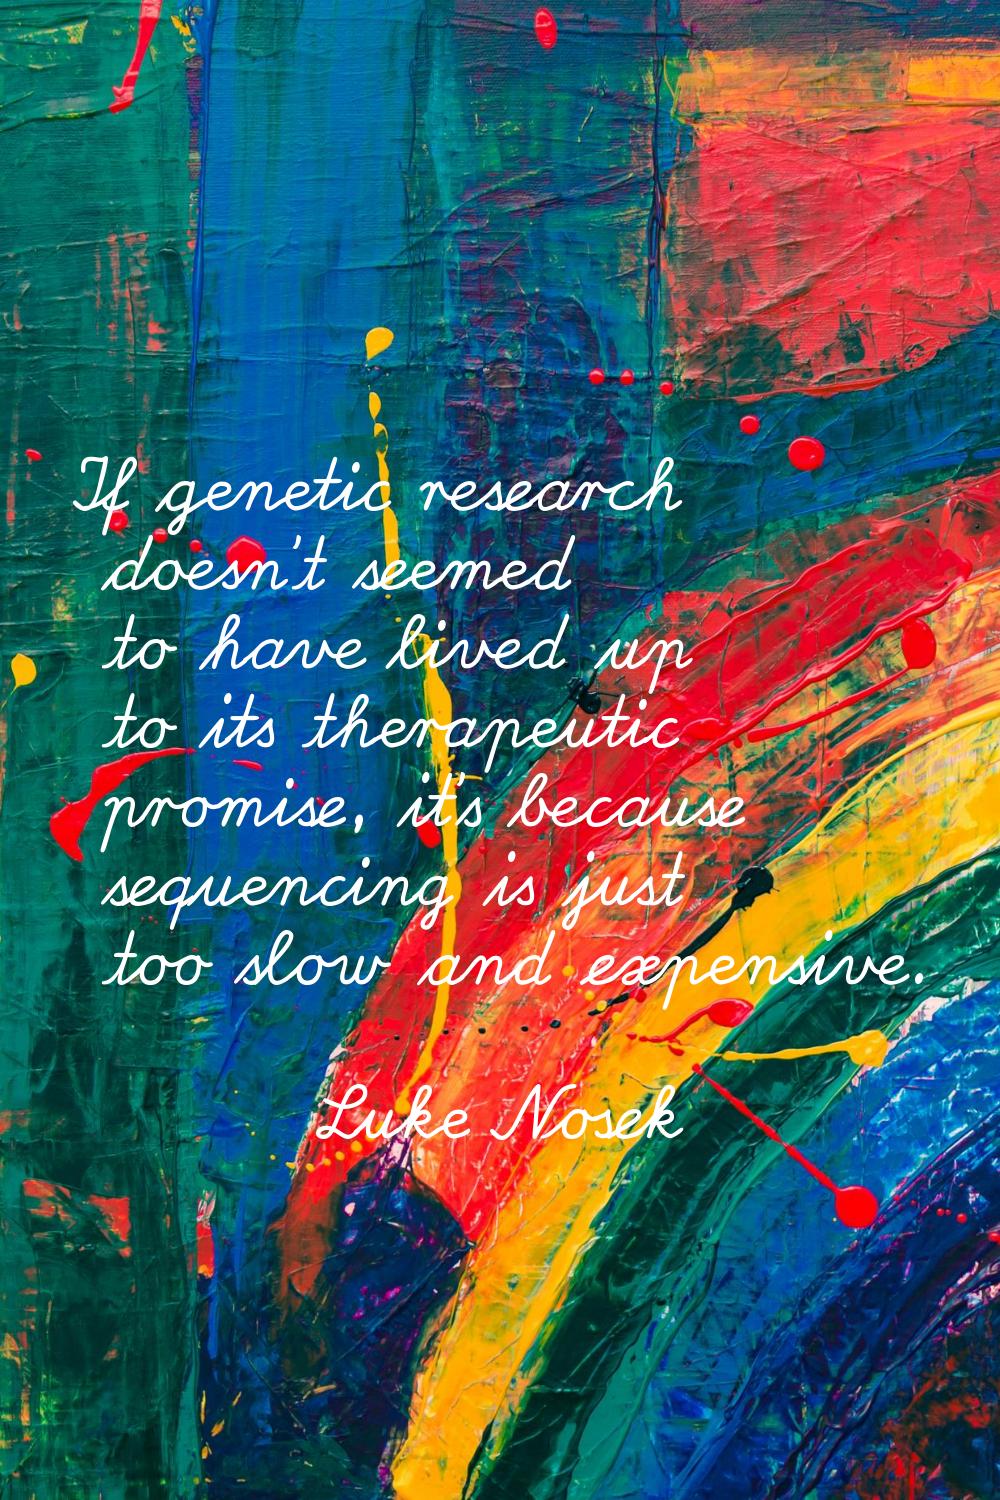 If genetic research doesn't seemed to have lived up to its therapeutic promise, it's because sequen